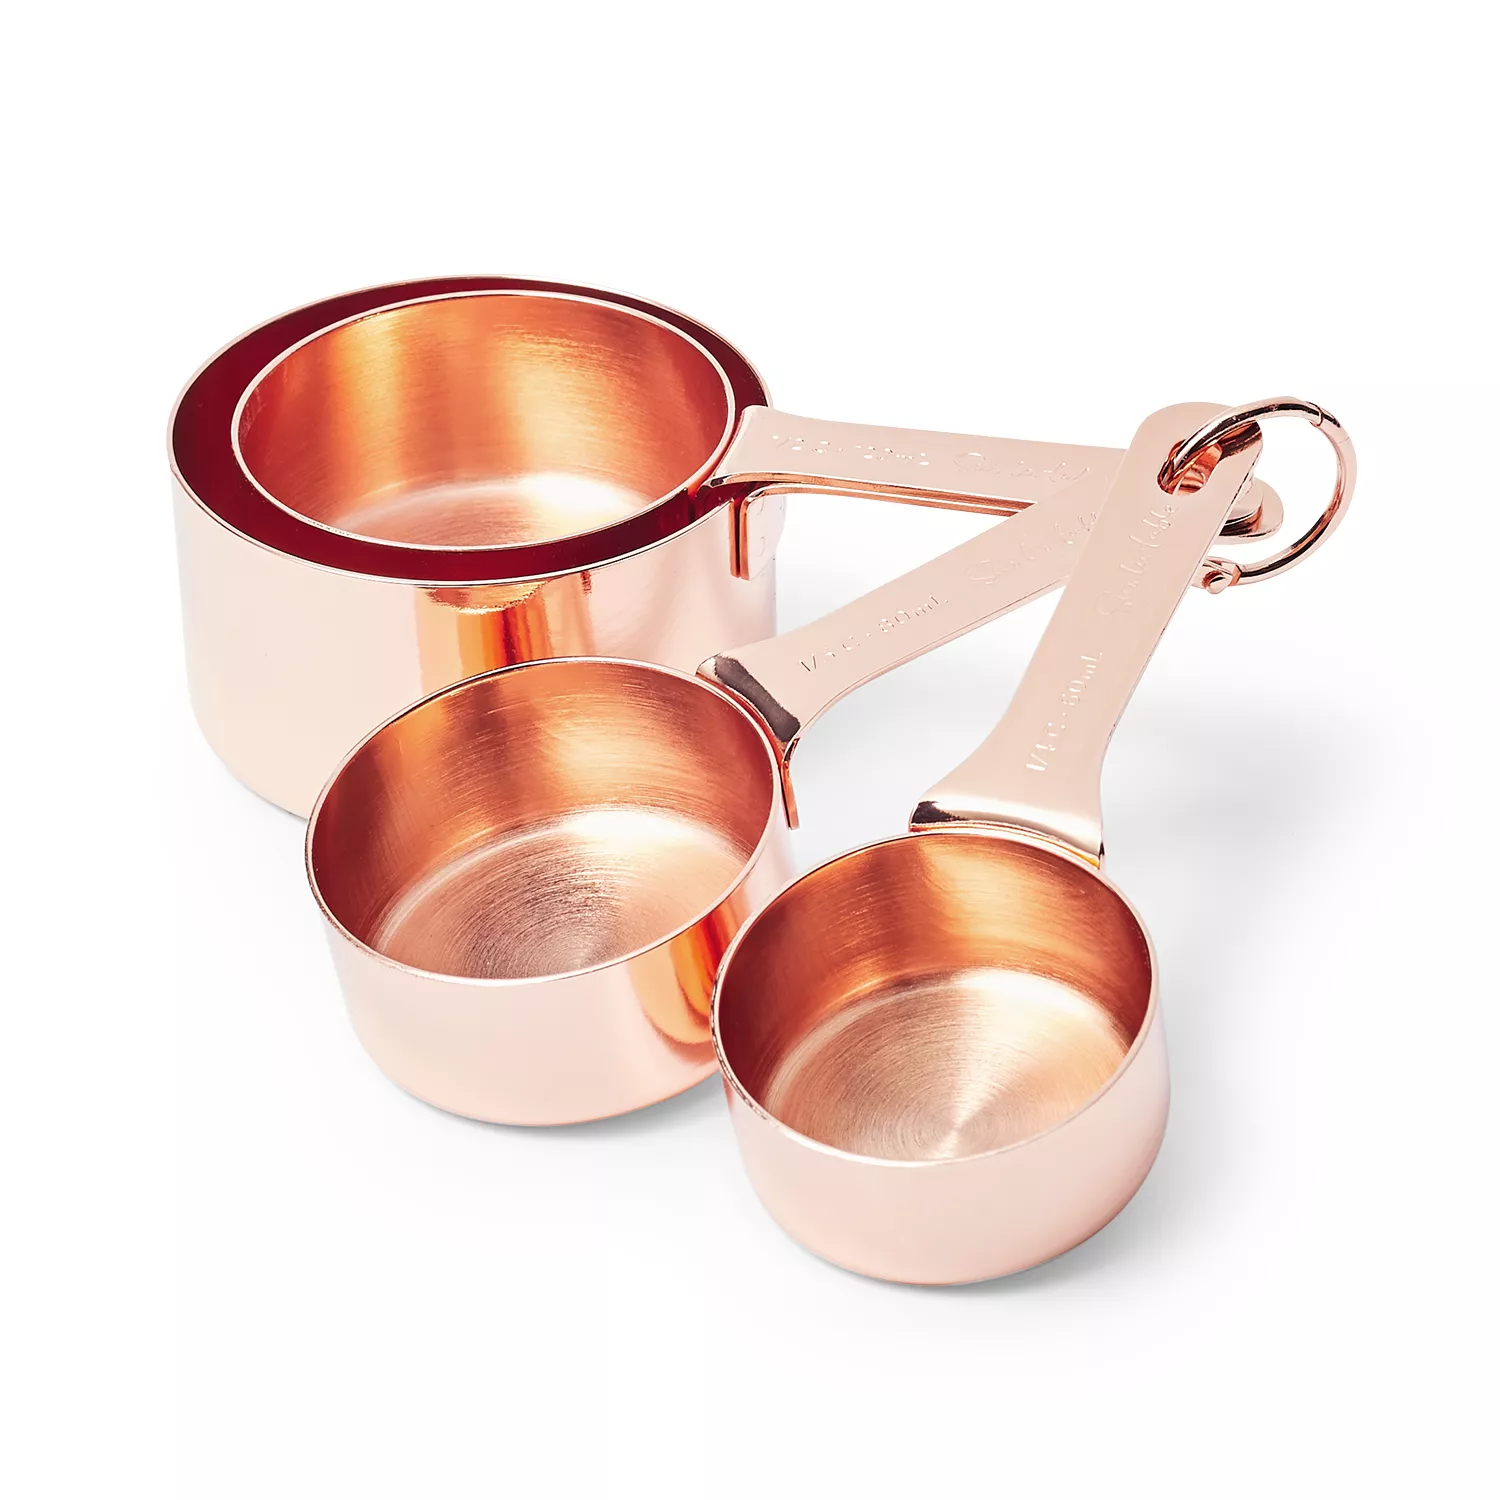 Wayfair, 2/3 Cup Measuring Cups & Spoons, Up to 70% Off Until 11/20